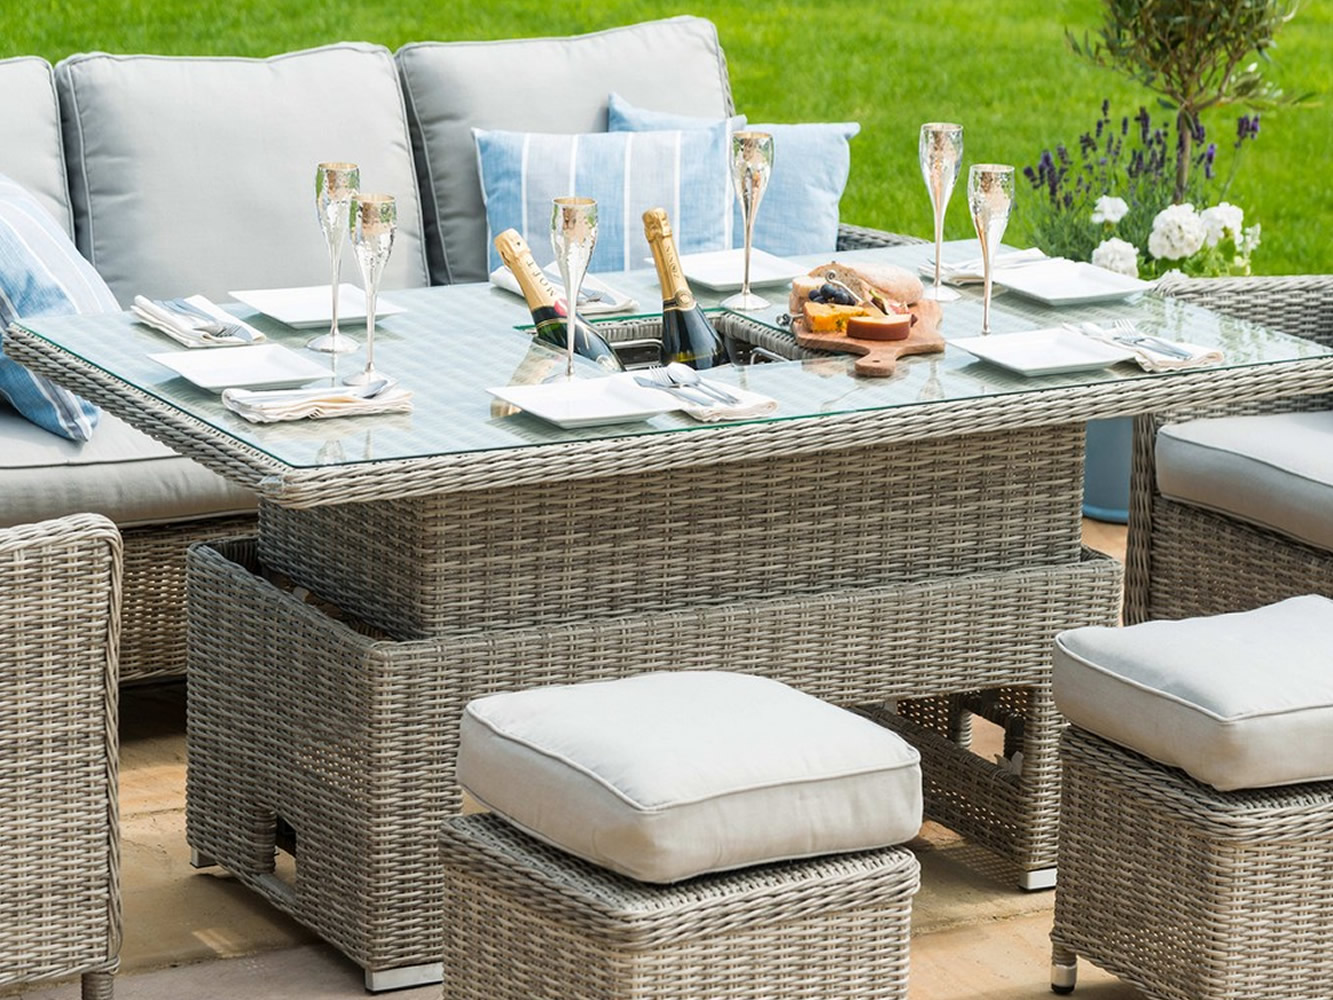 Cheshire Sofa Dining Set with Ice Bucket & Rising Table